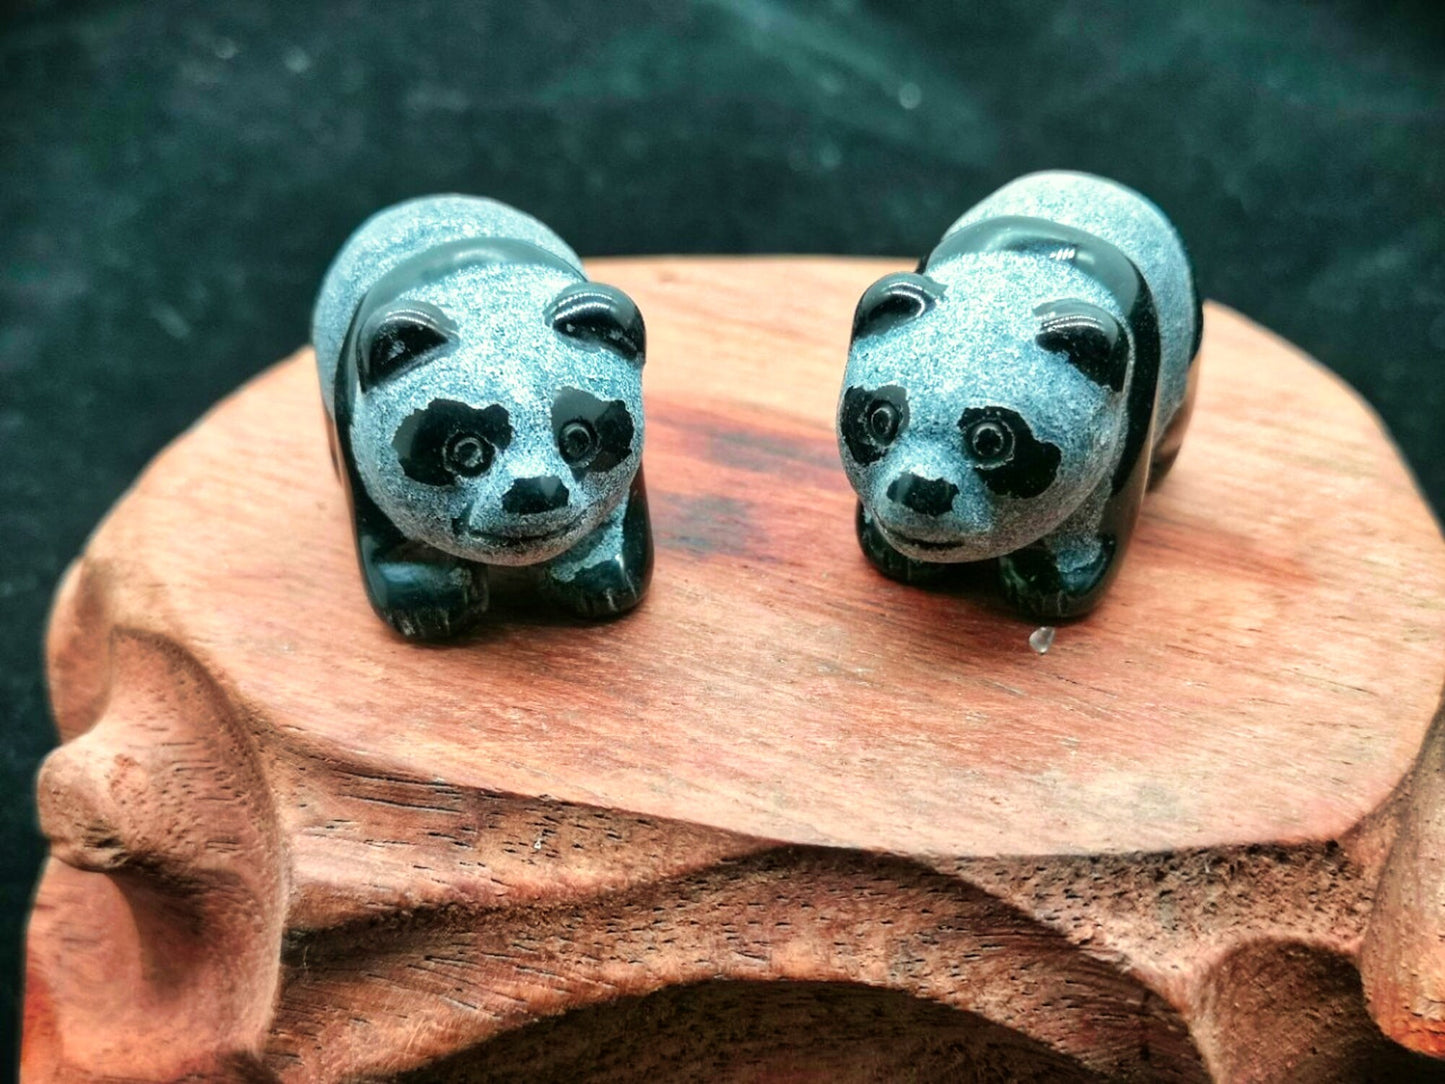 Crystal Figurine - Lovely Panda Ornament made of Obsidian Stone